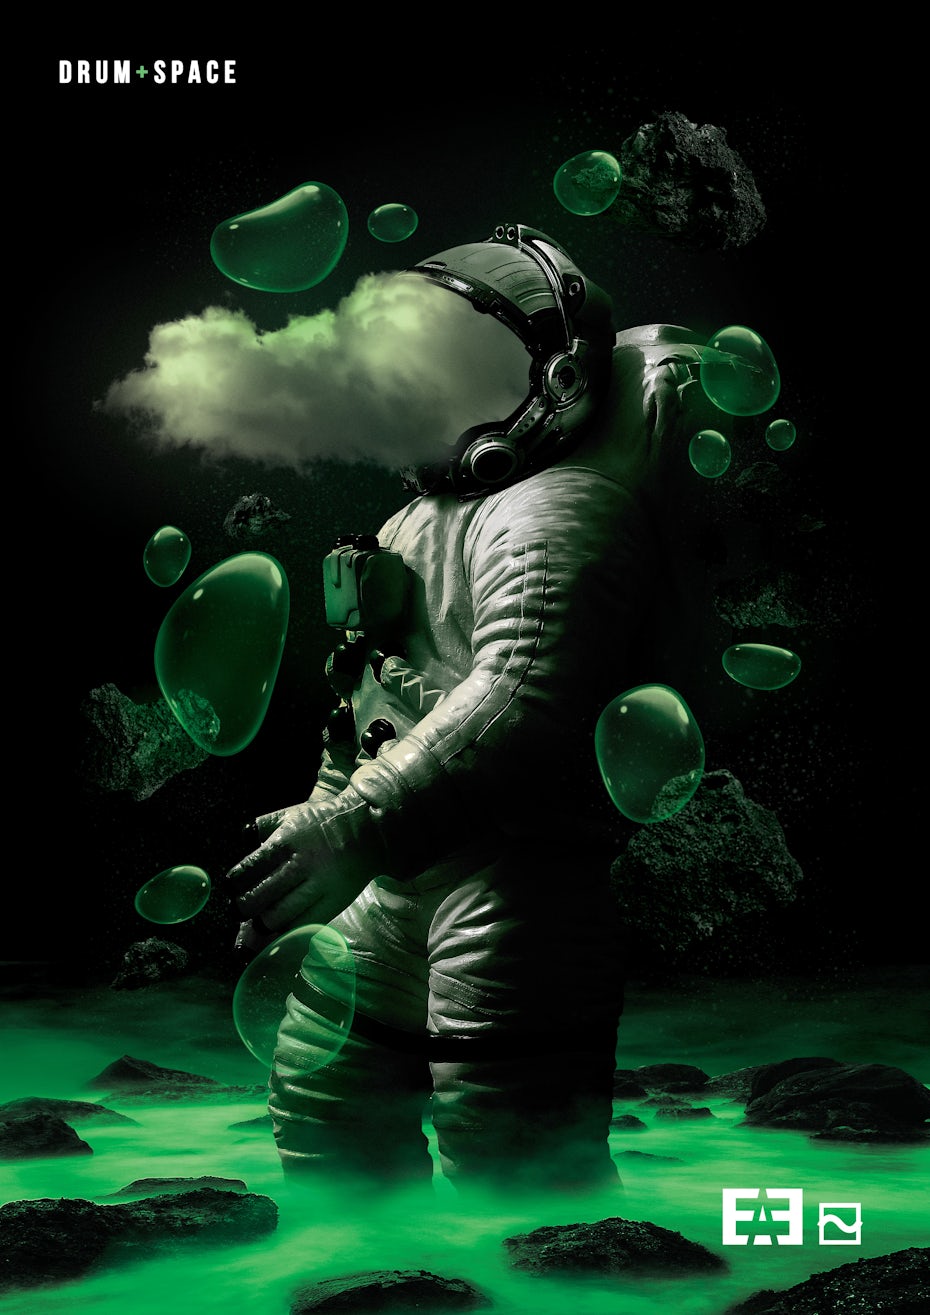 Graphic design trends 2020 example: Poster design showing an astronaut full of smoke